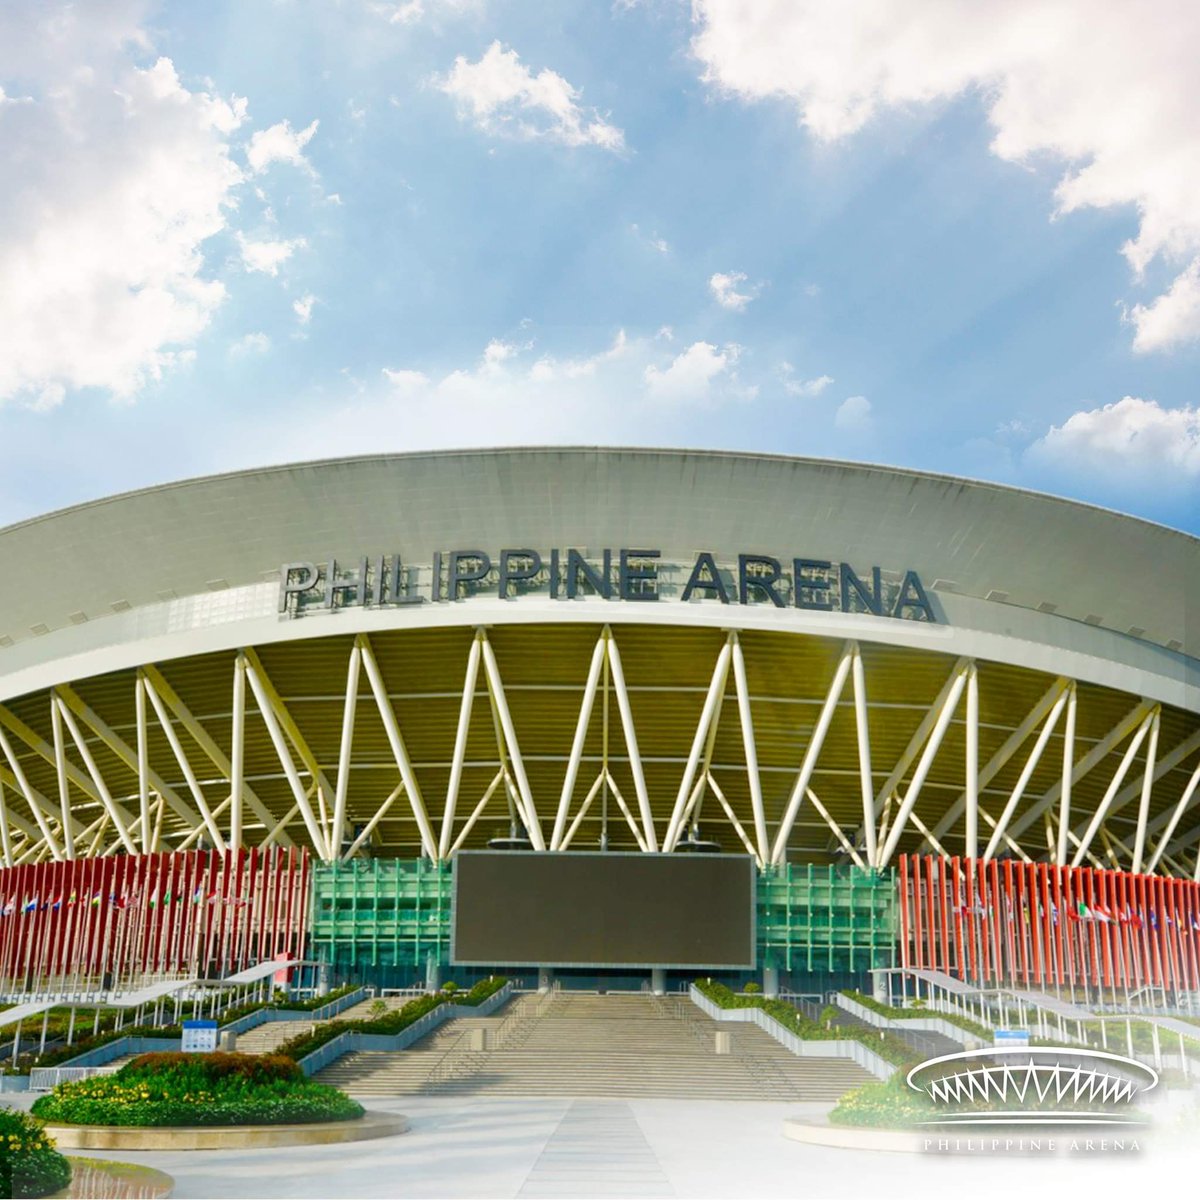 How many months did it take to construct Philippine Arena? 🗓